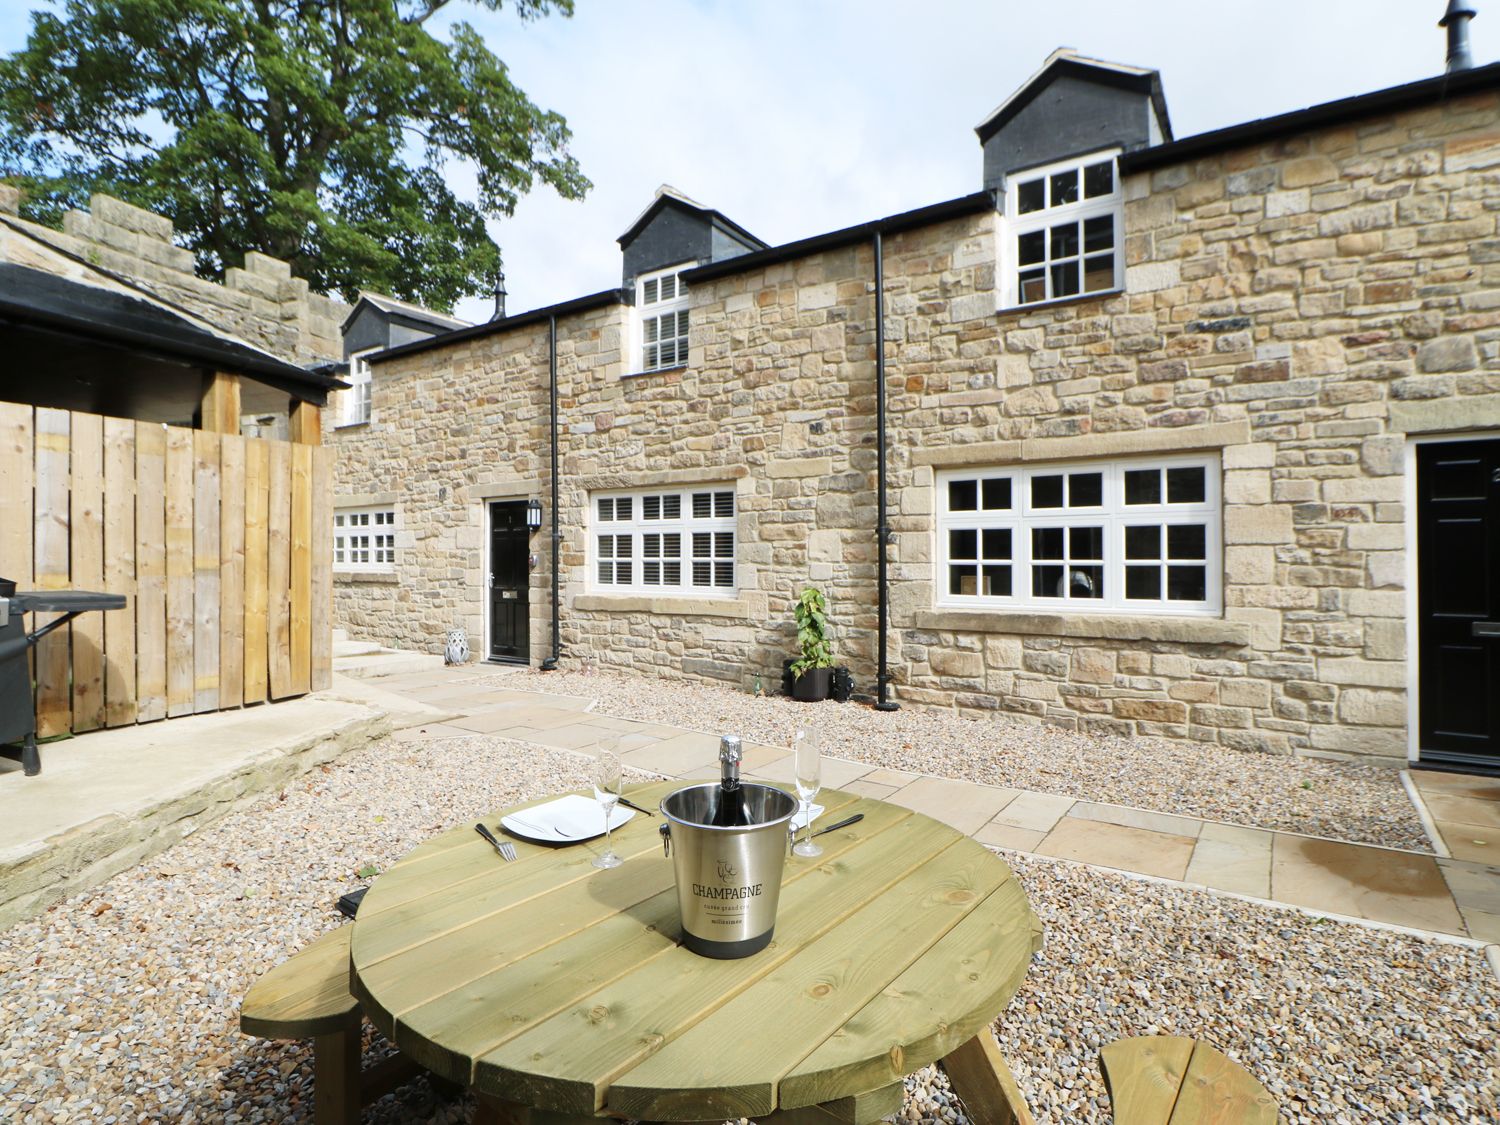 Arch Spa Stanhope Castle Stanhope Alpha Holiday Lettings